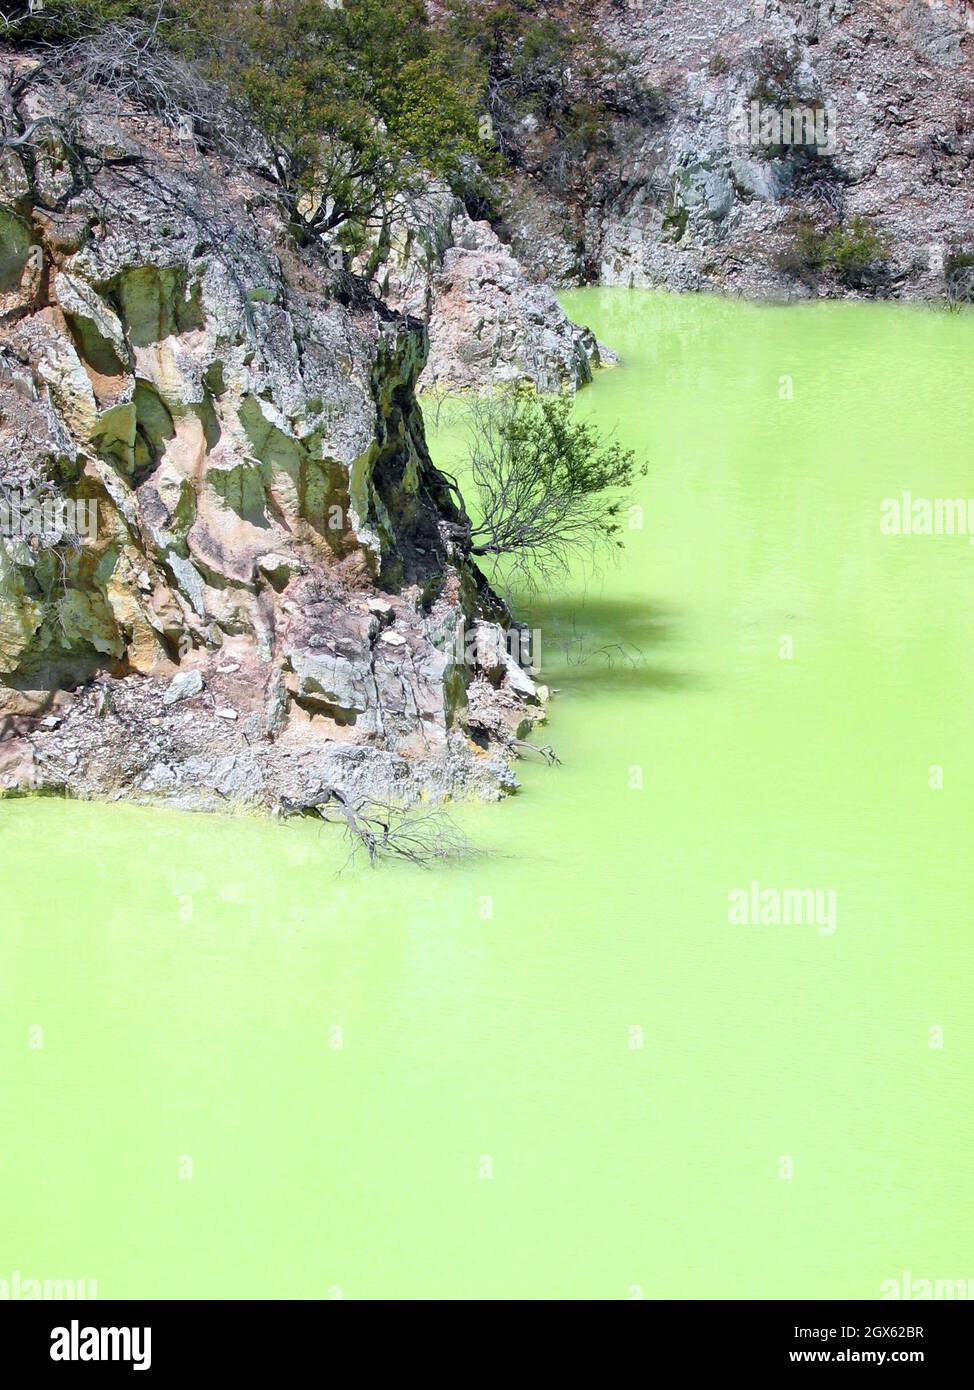 The Devil's Bath, also known as Devils Pool, located in Waiotapu along the Taupo Volcanic Zone, displays geothermal chemistry with its sulphur and ferrous salts creating a neon green pool.  The area, located in the North Island of New Zealand, has been a protected scenic reserve since 1931. Stock Photo